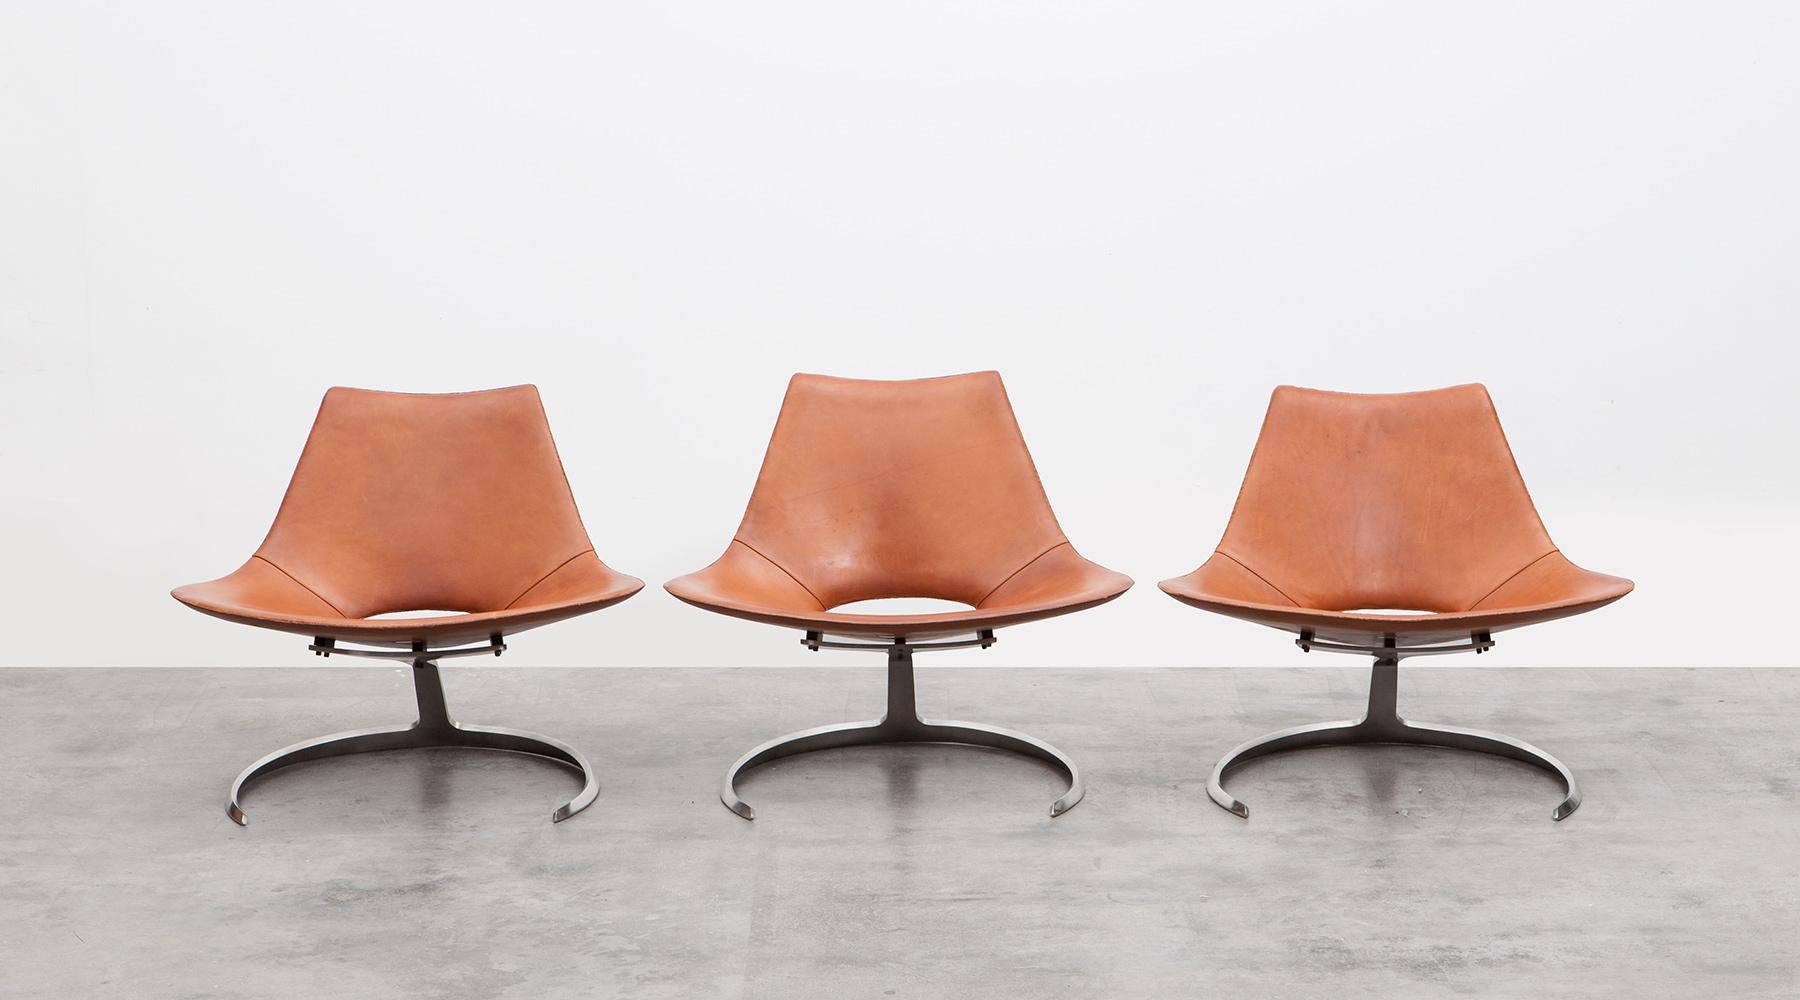 1960s Brown Leather Scimitar Chair by Fabricius / Kastholm 'a' In Good Condition For Sale In Frankfurt, Hessen, DE